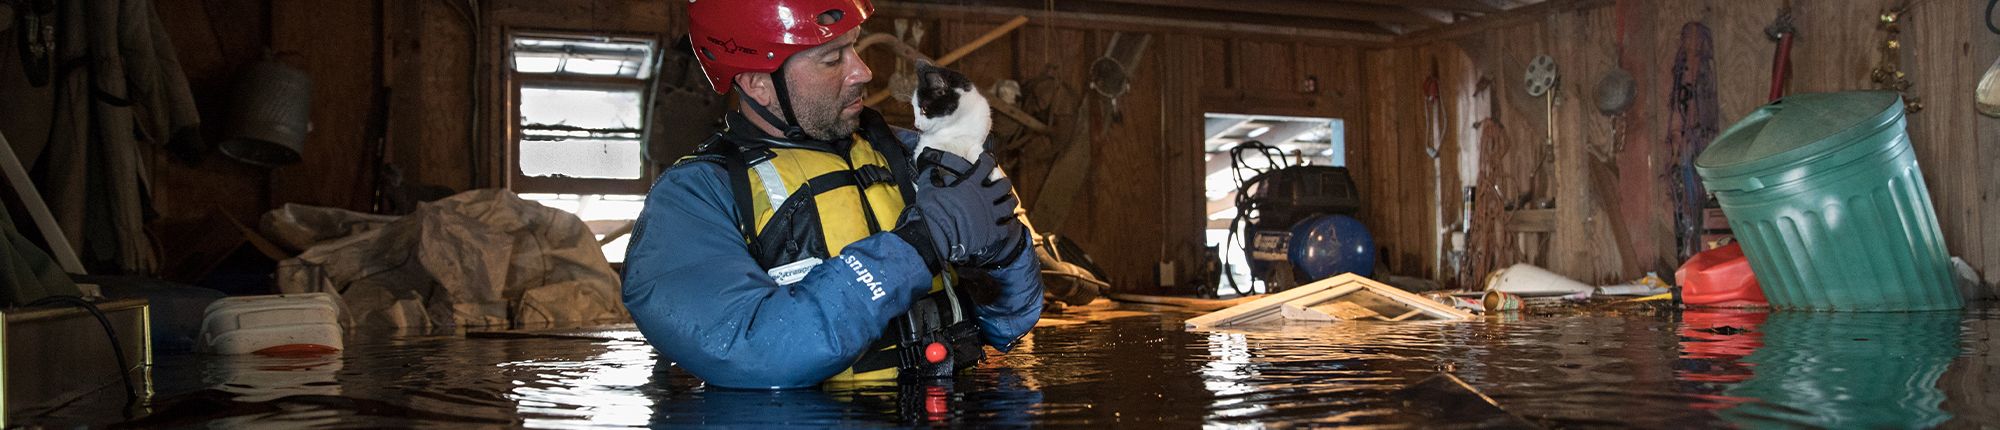 Man rescuing cat from flooded house